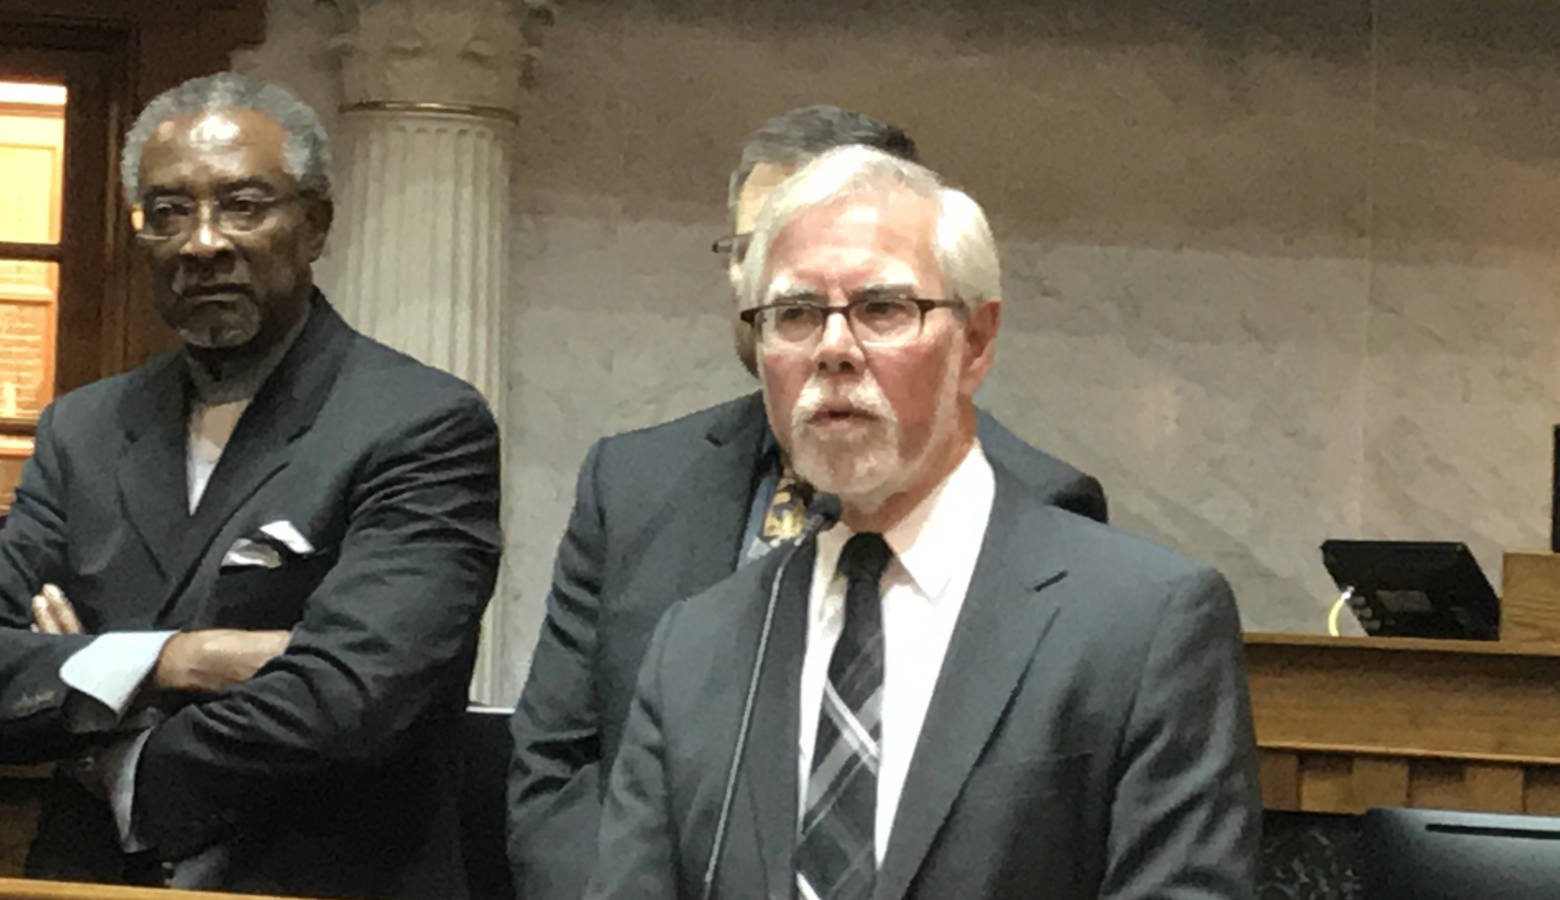 Sen. Tim Lanane (D-Anderson) says the public deserves to hear debate in the legislature on issues like raising the minimum wage and redistricting reform. (Brandon Smith/IPB News)